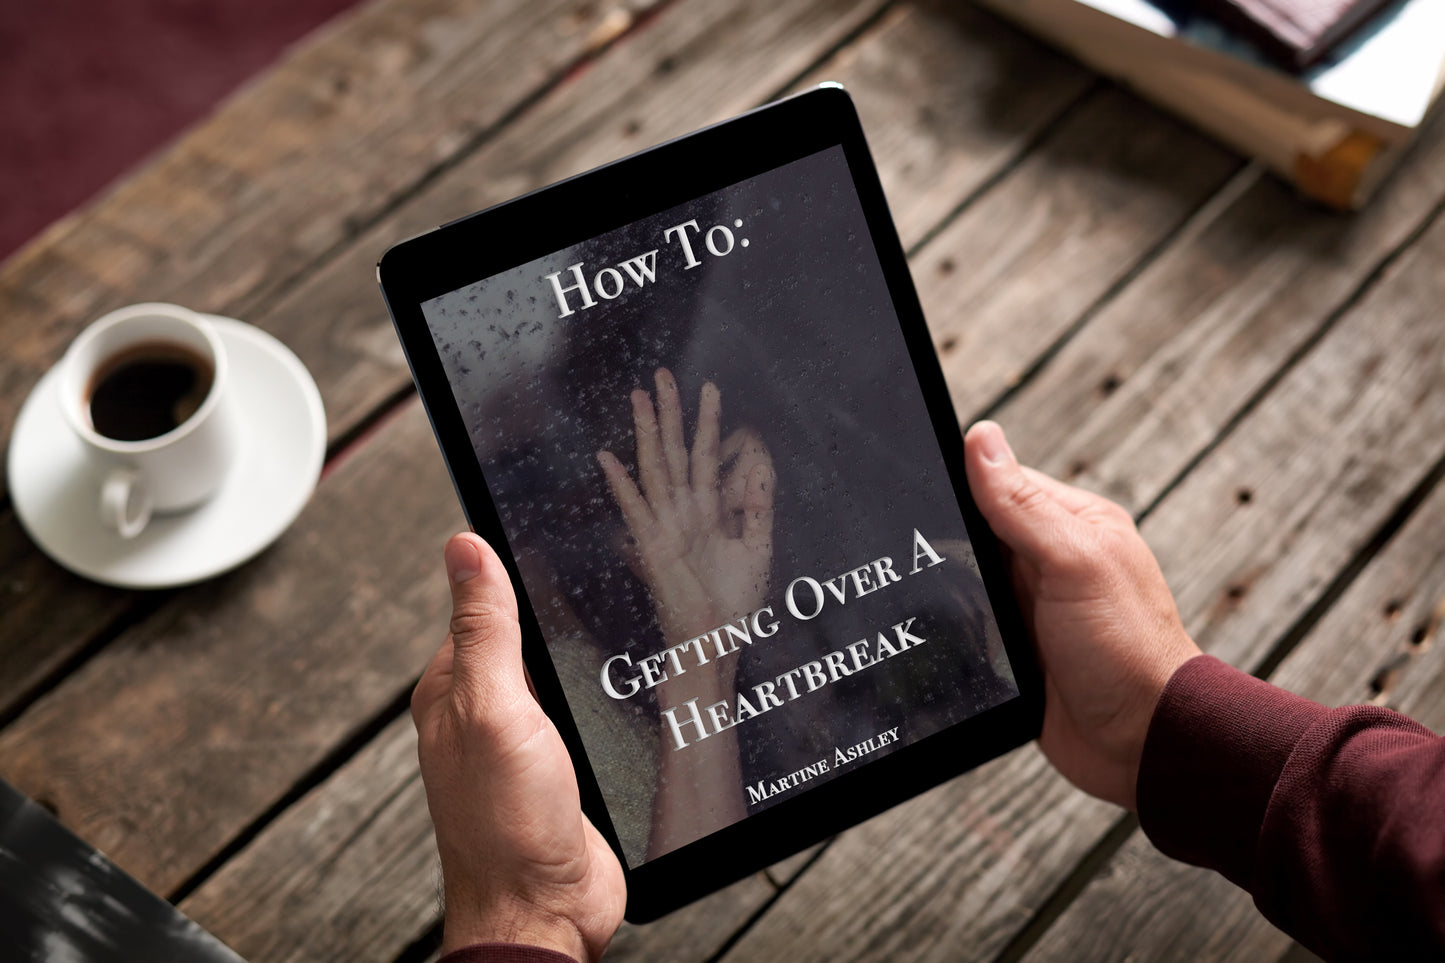 How To: Getting Over A Heartbreak Ebook